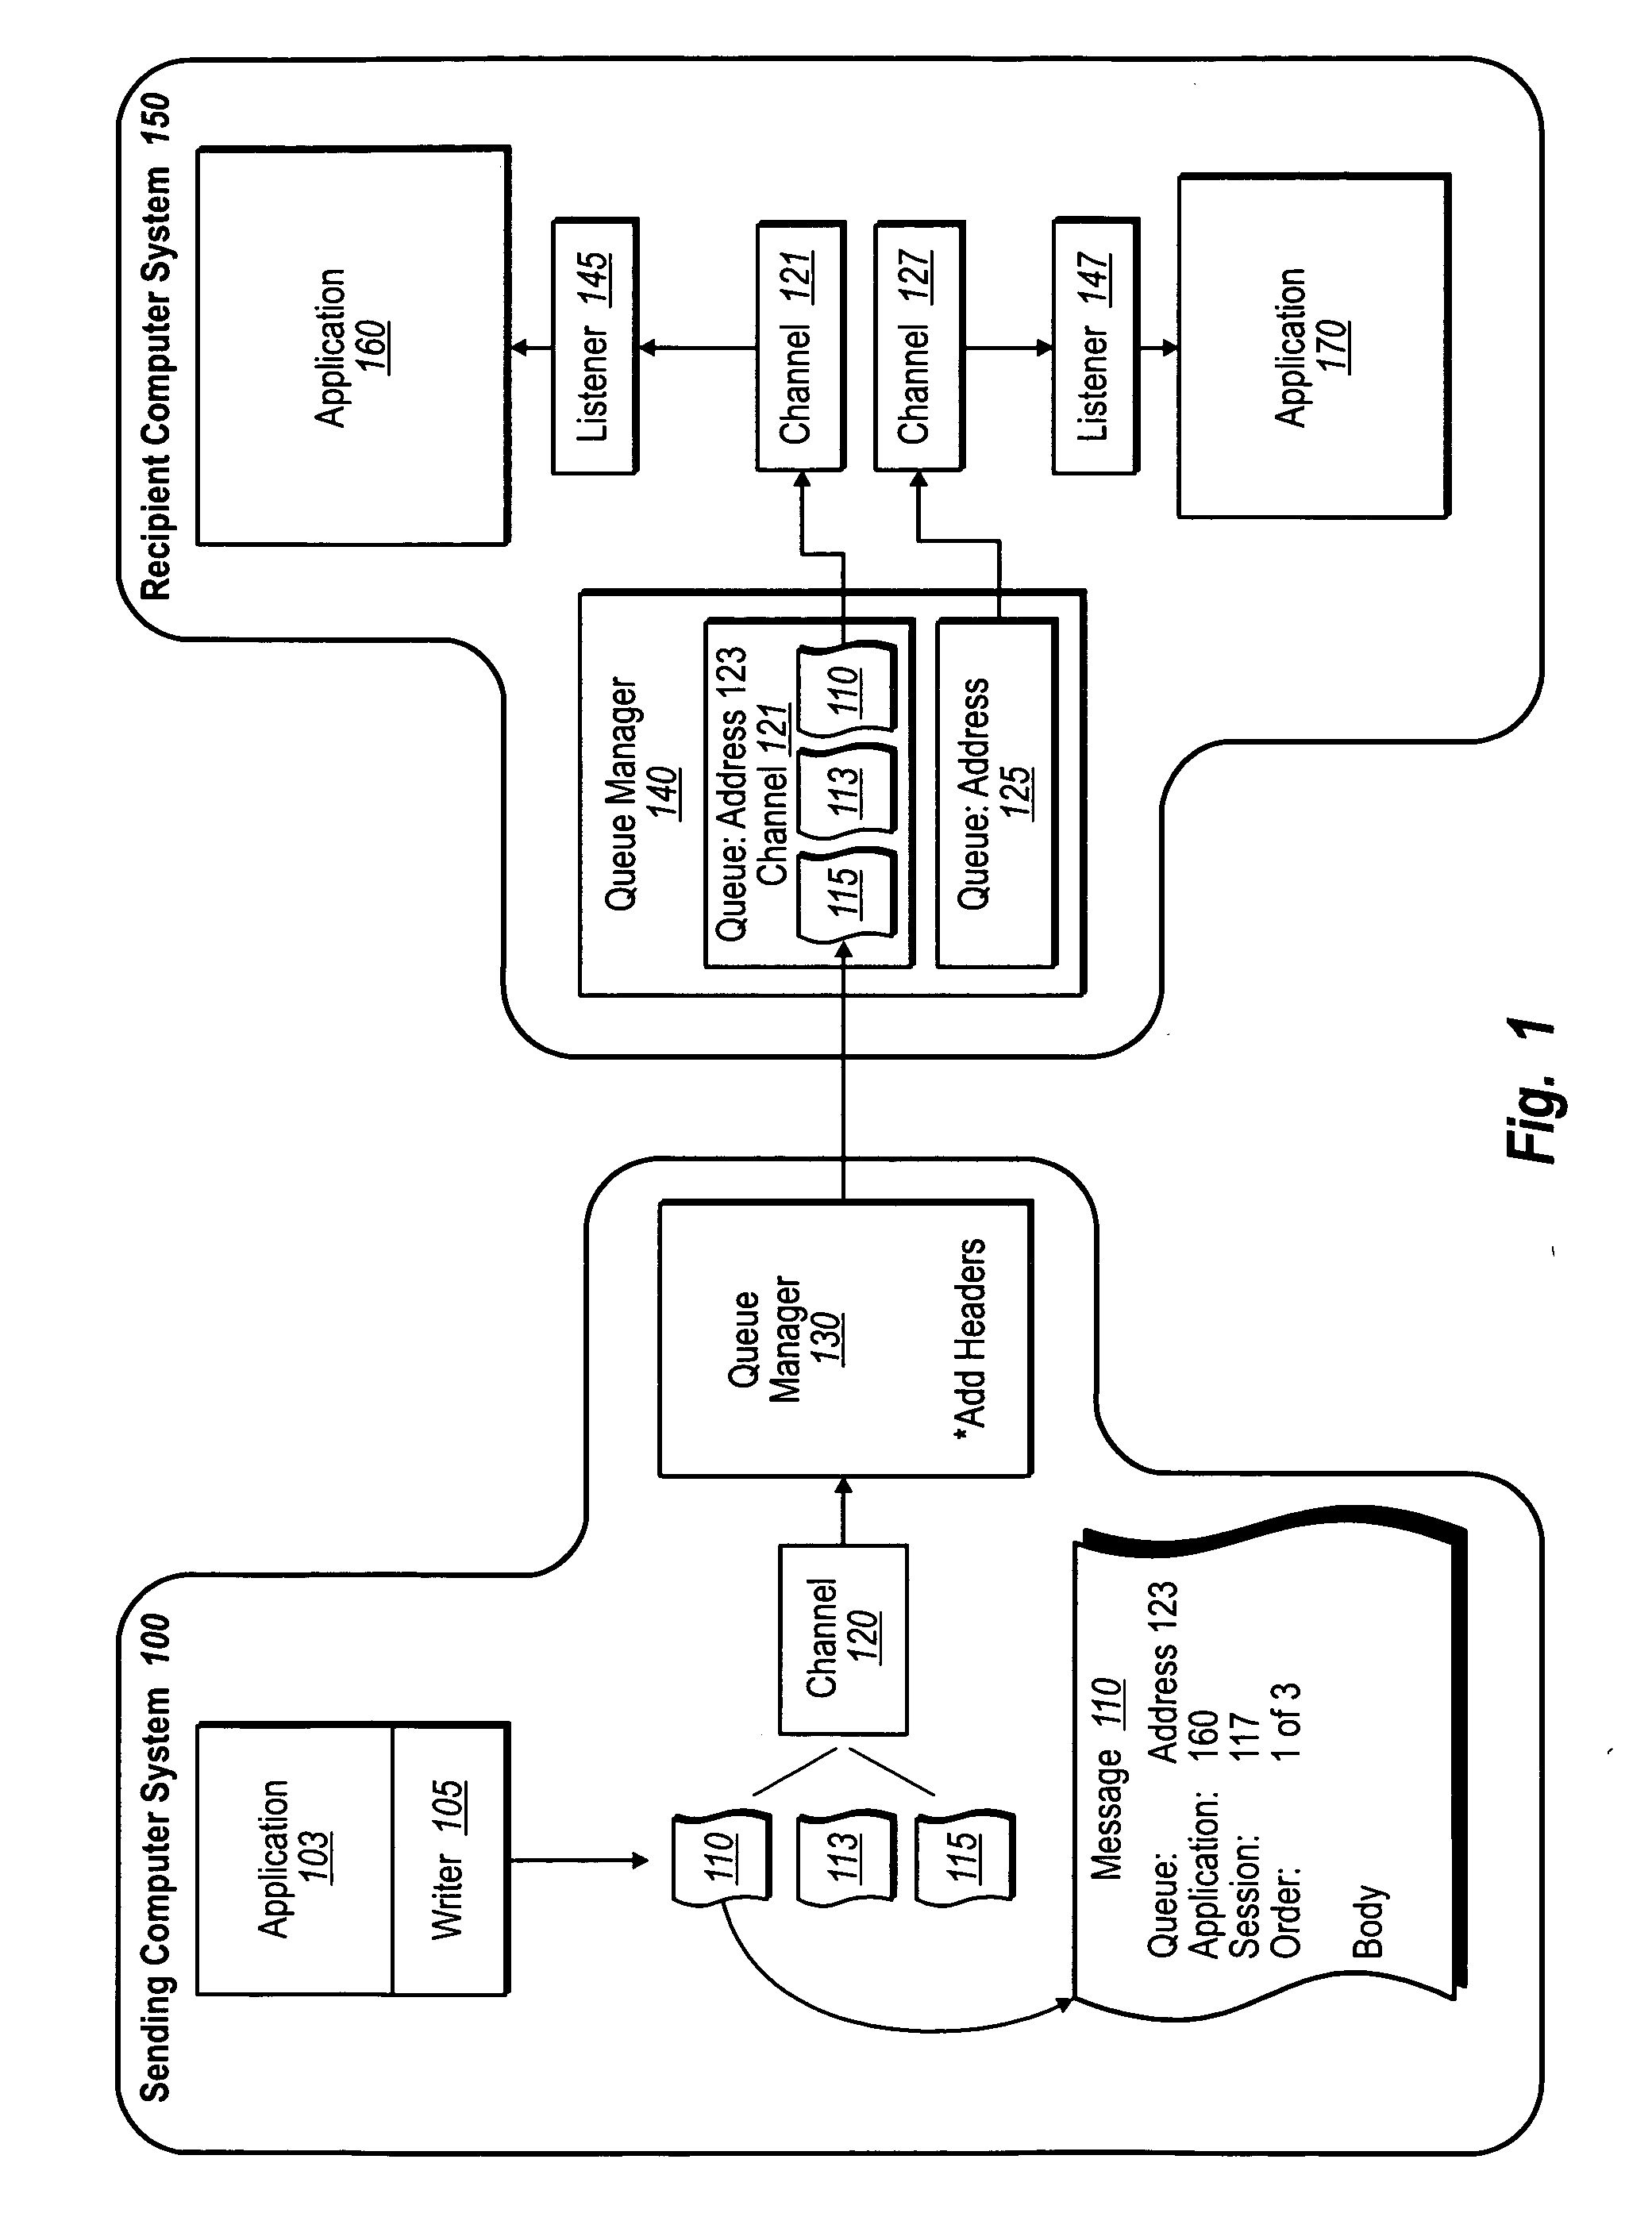 Queued sessions for communicating correlated messages over a network